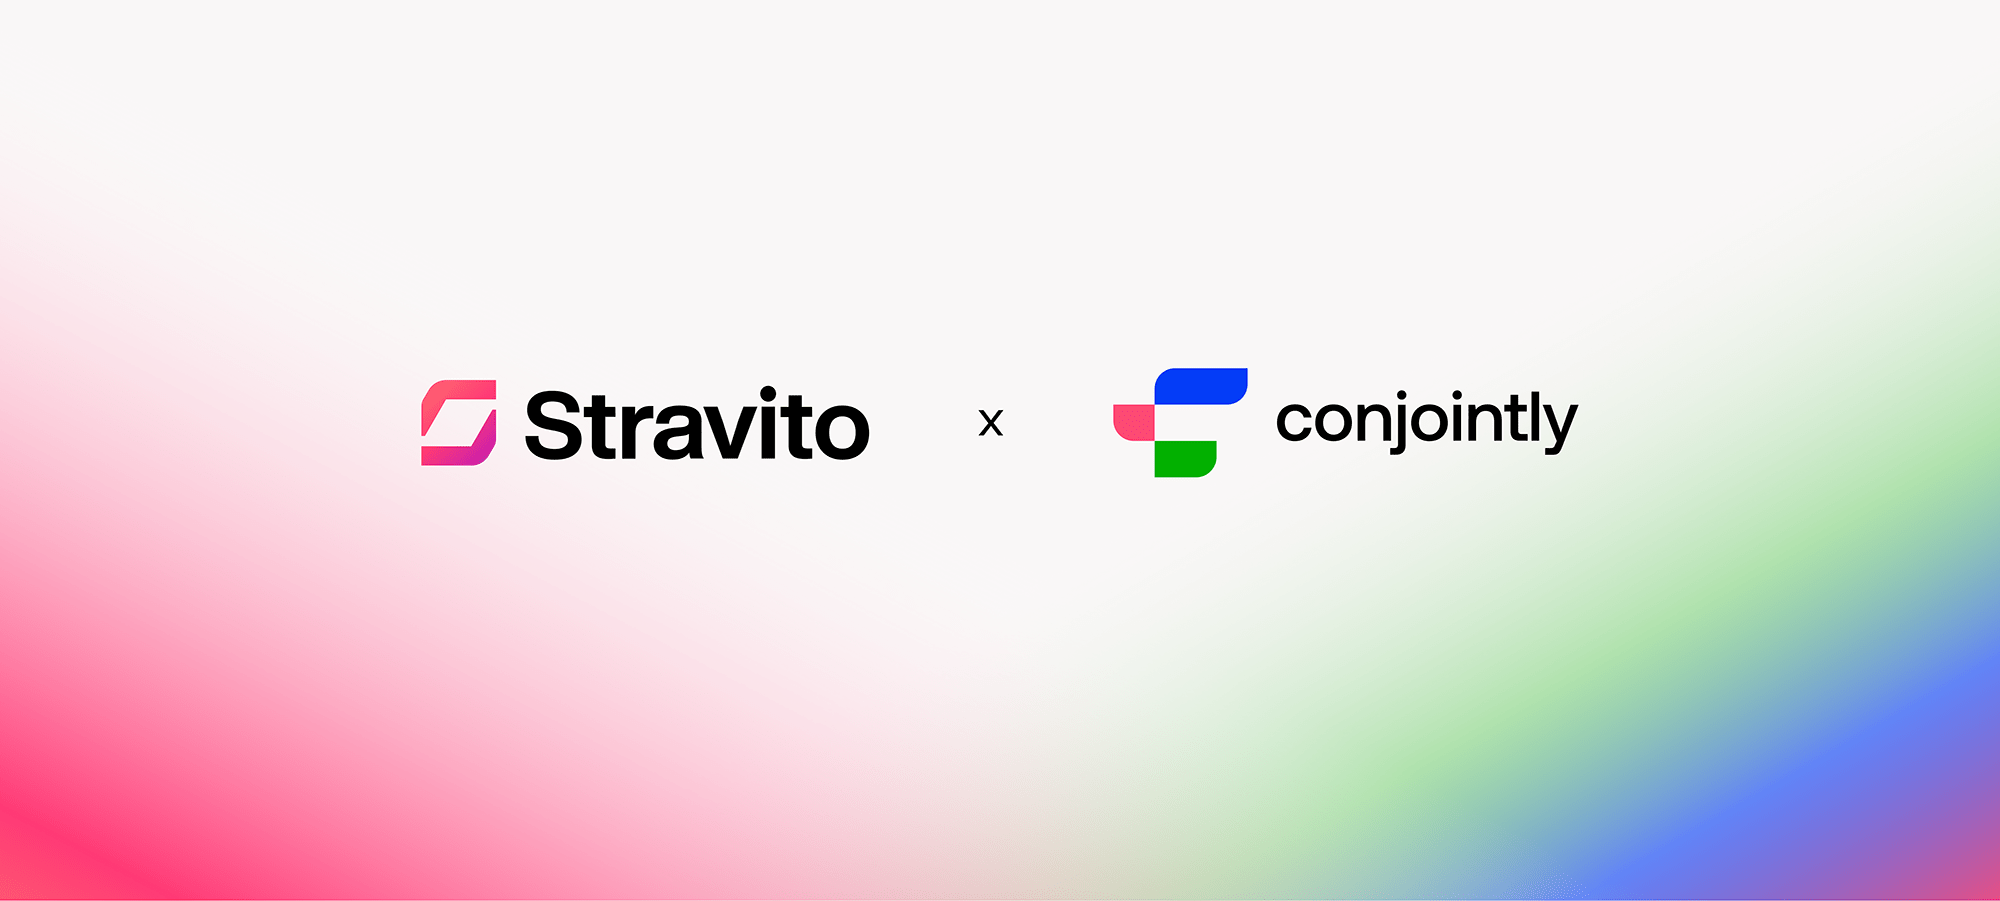 Stravito named a Trusted AI Startup in Europe